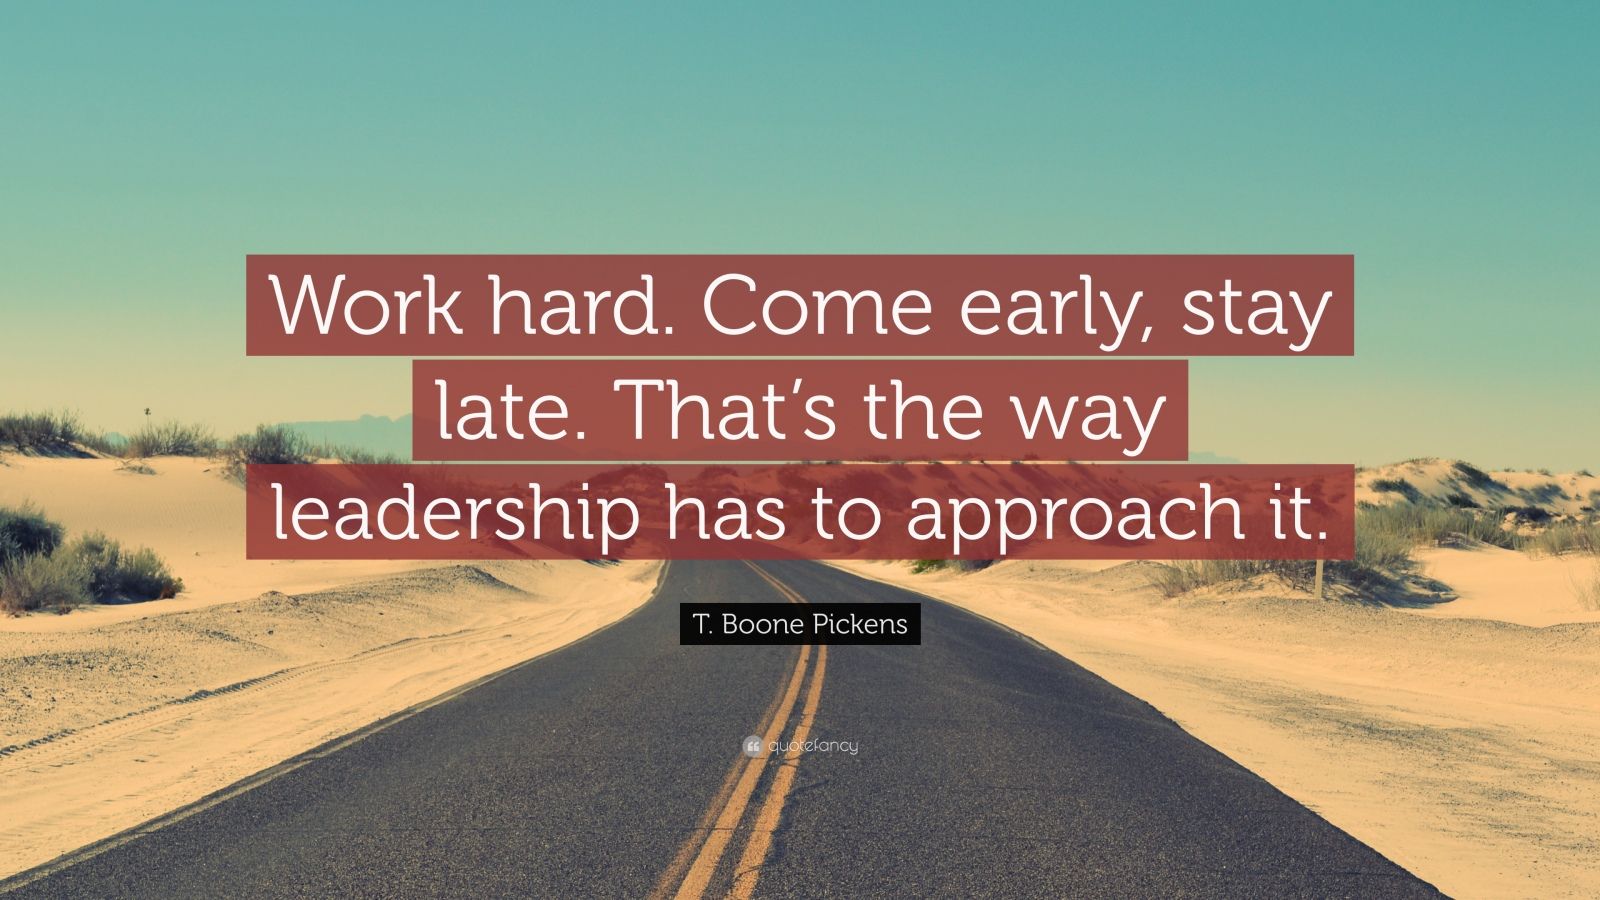 T. Boone Pickens Quote: “Work hard. Come early, stay late. That’s the ...